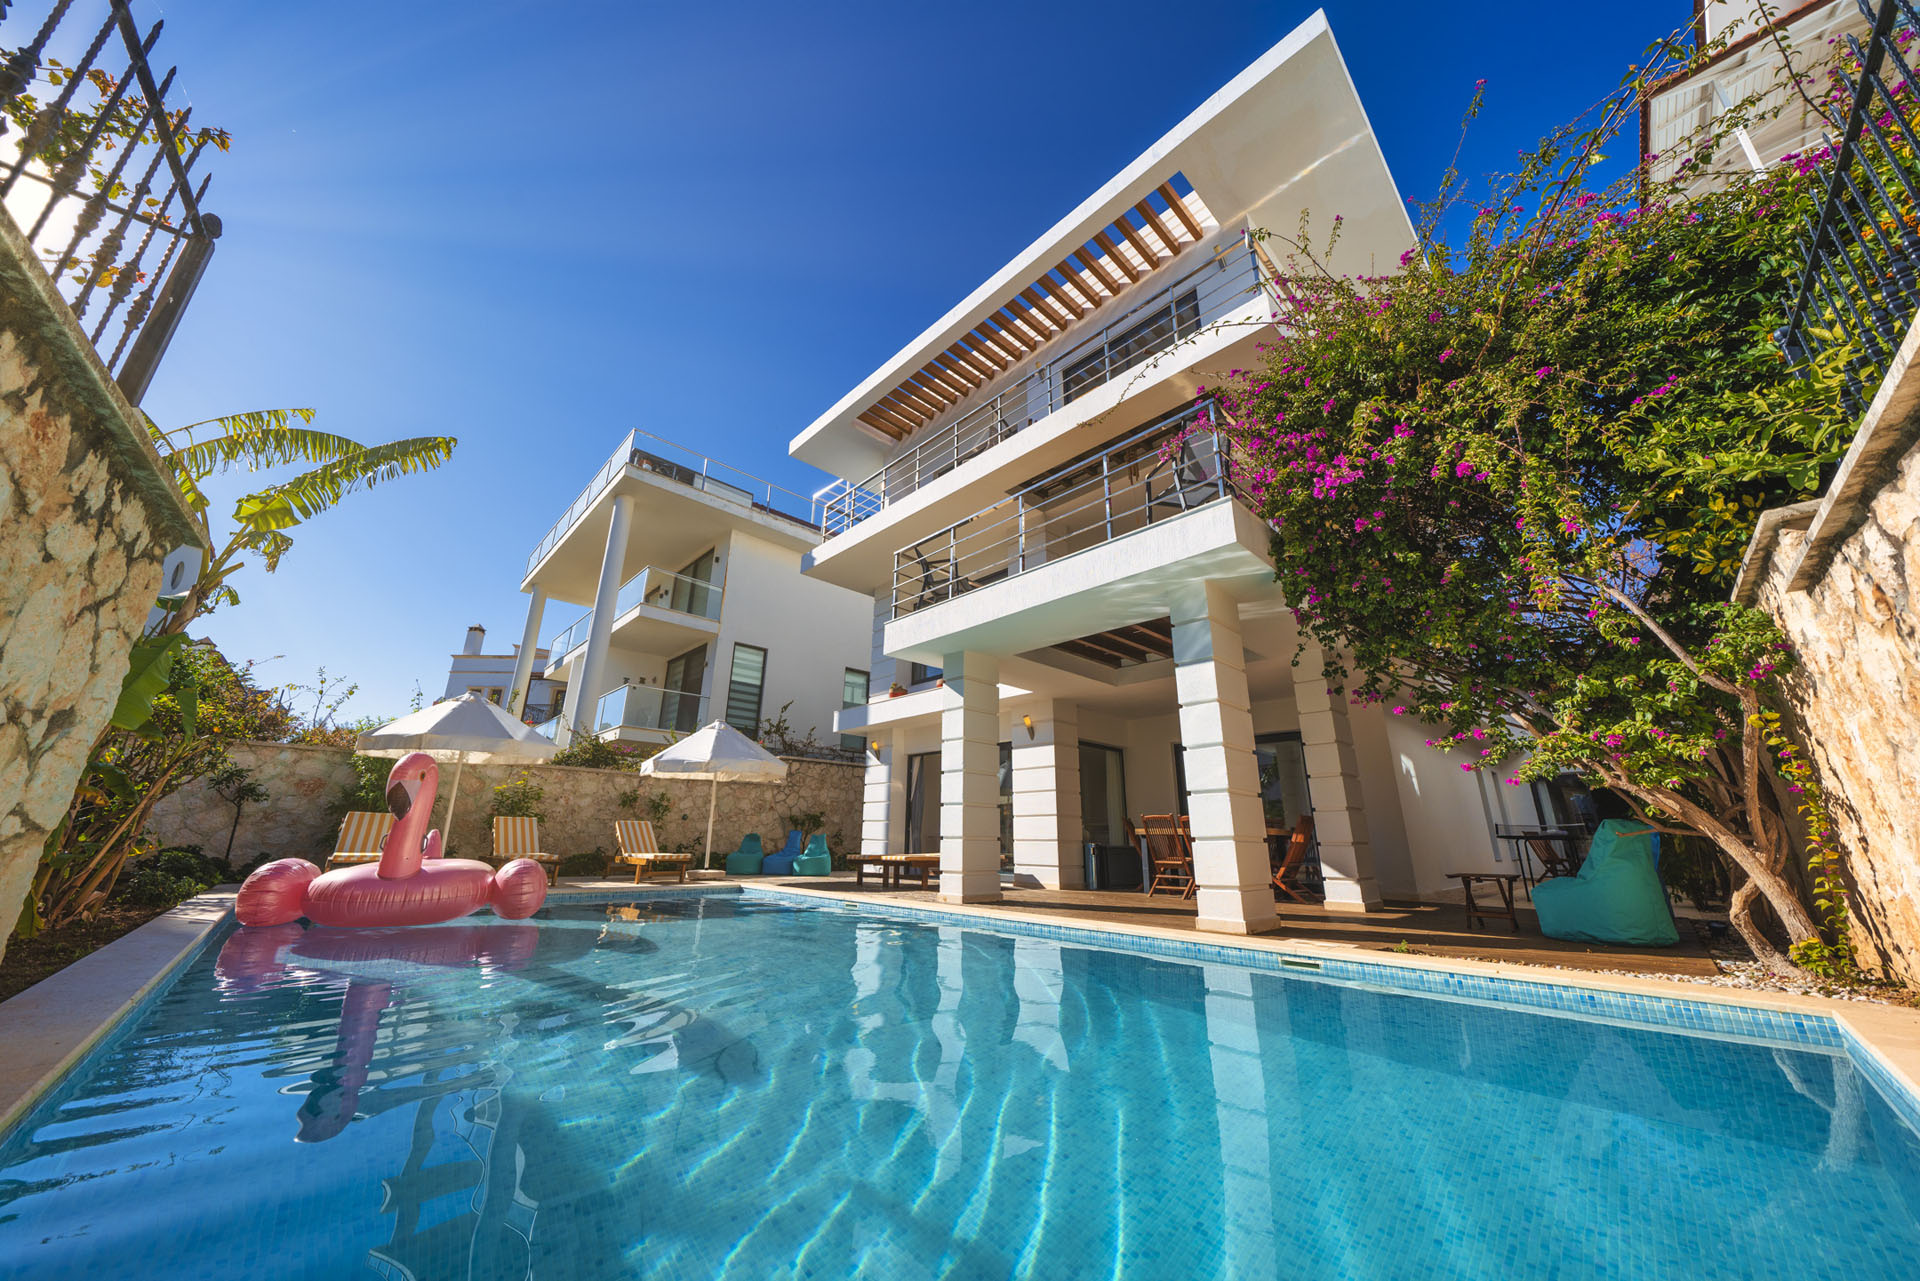 Property Image 1 - Luxury Holidays in this Ultra-Modern Detached Kalkan Villa